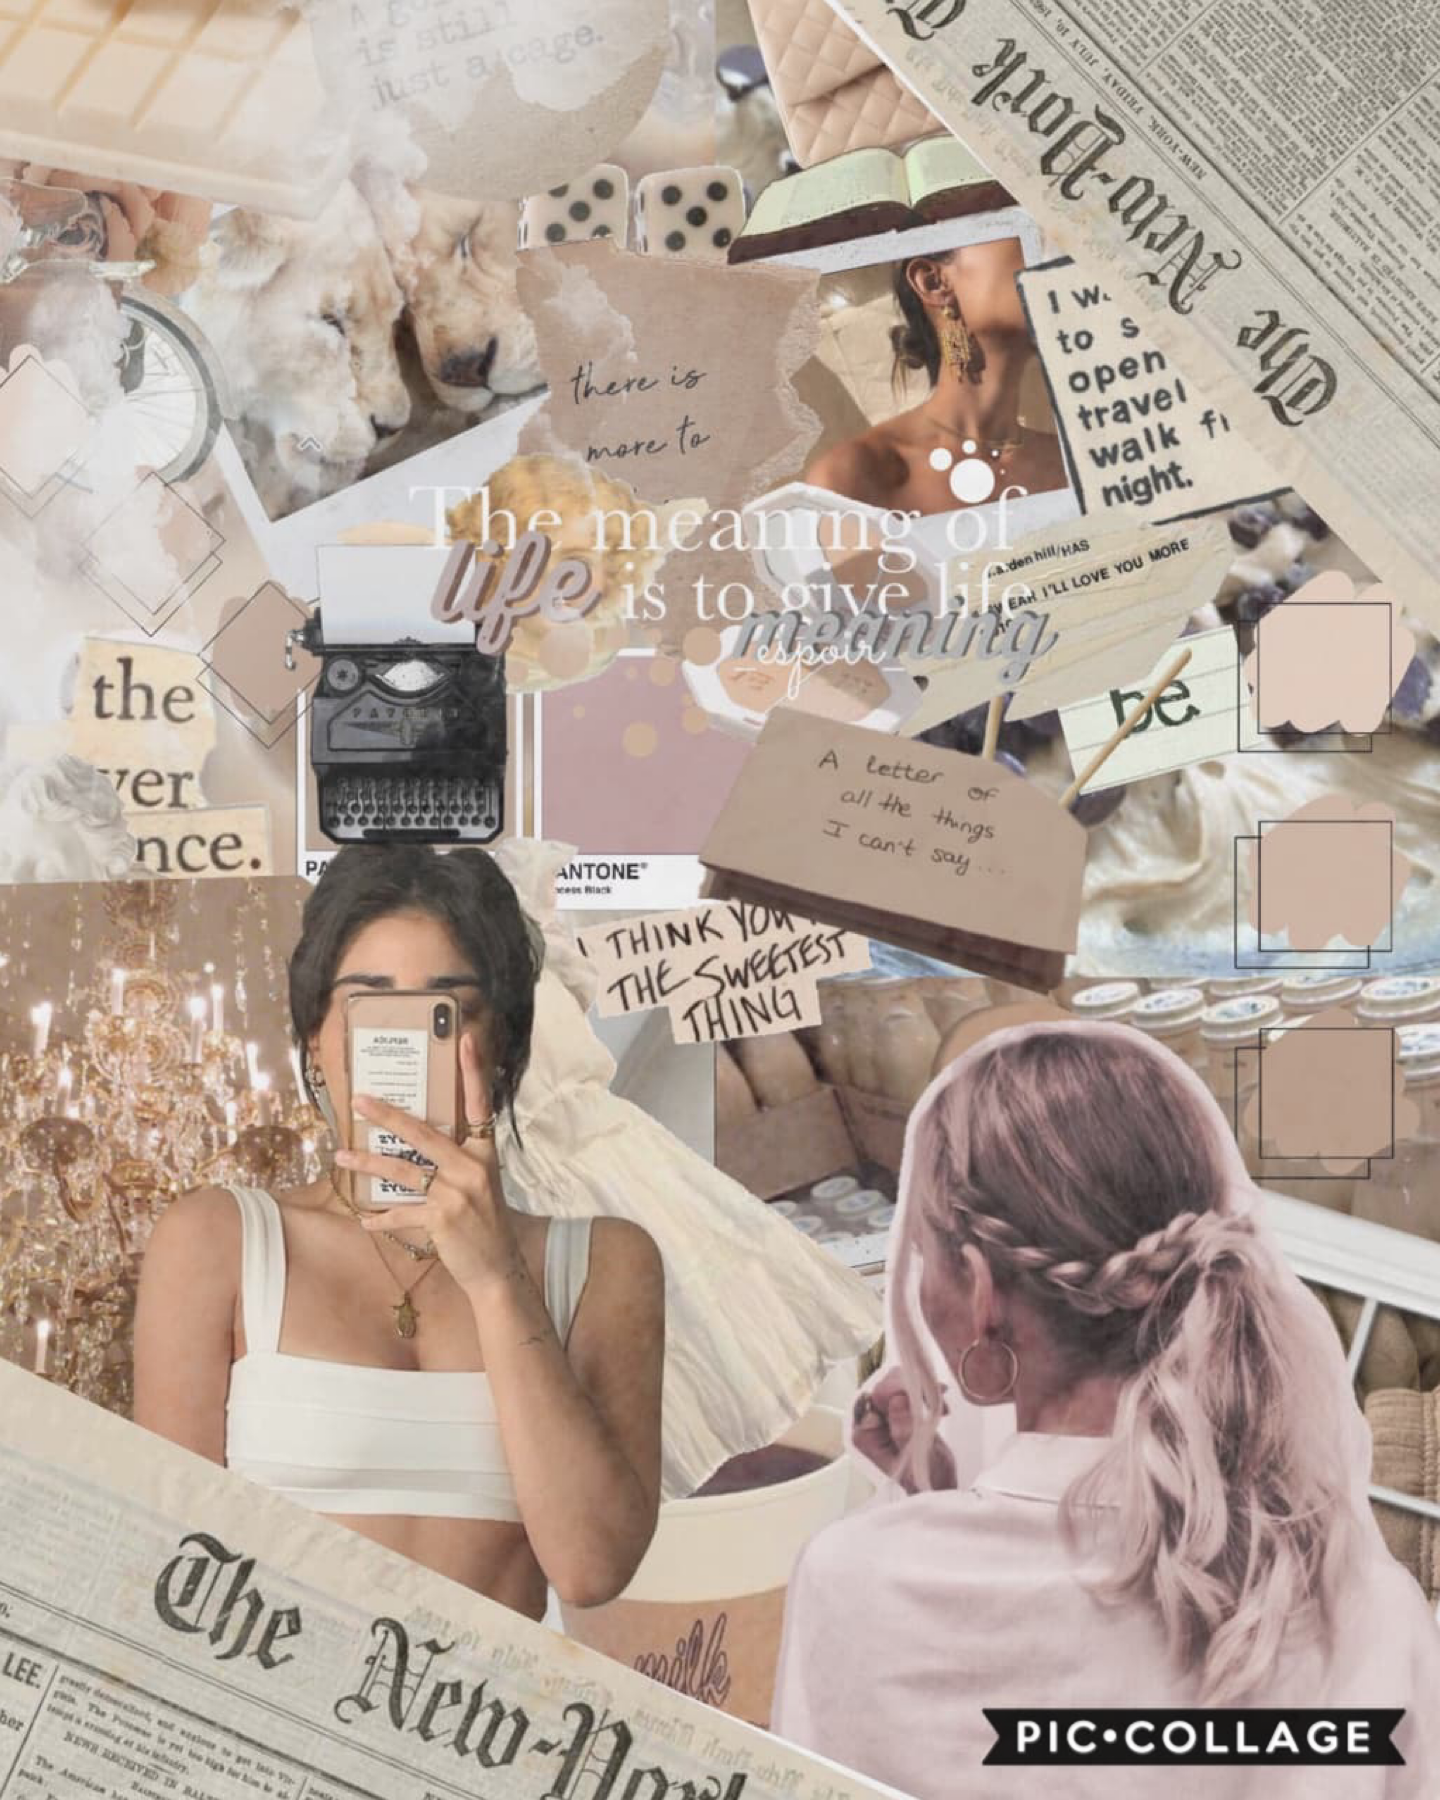 featuring....
_espoir_!
this is their first collage 
and it is just beautiful!
how can your first collage be this good?
they are new so go follow them!!